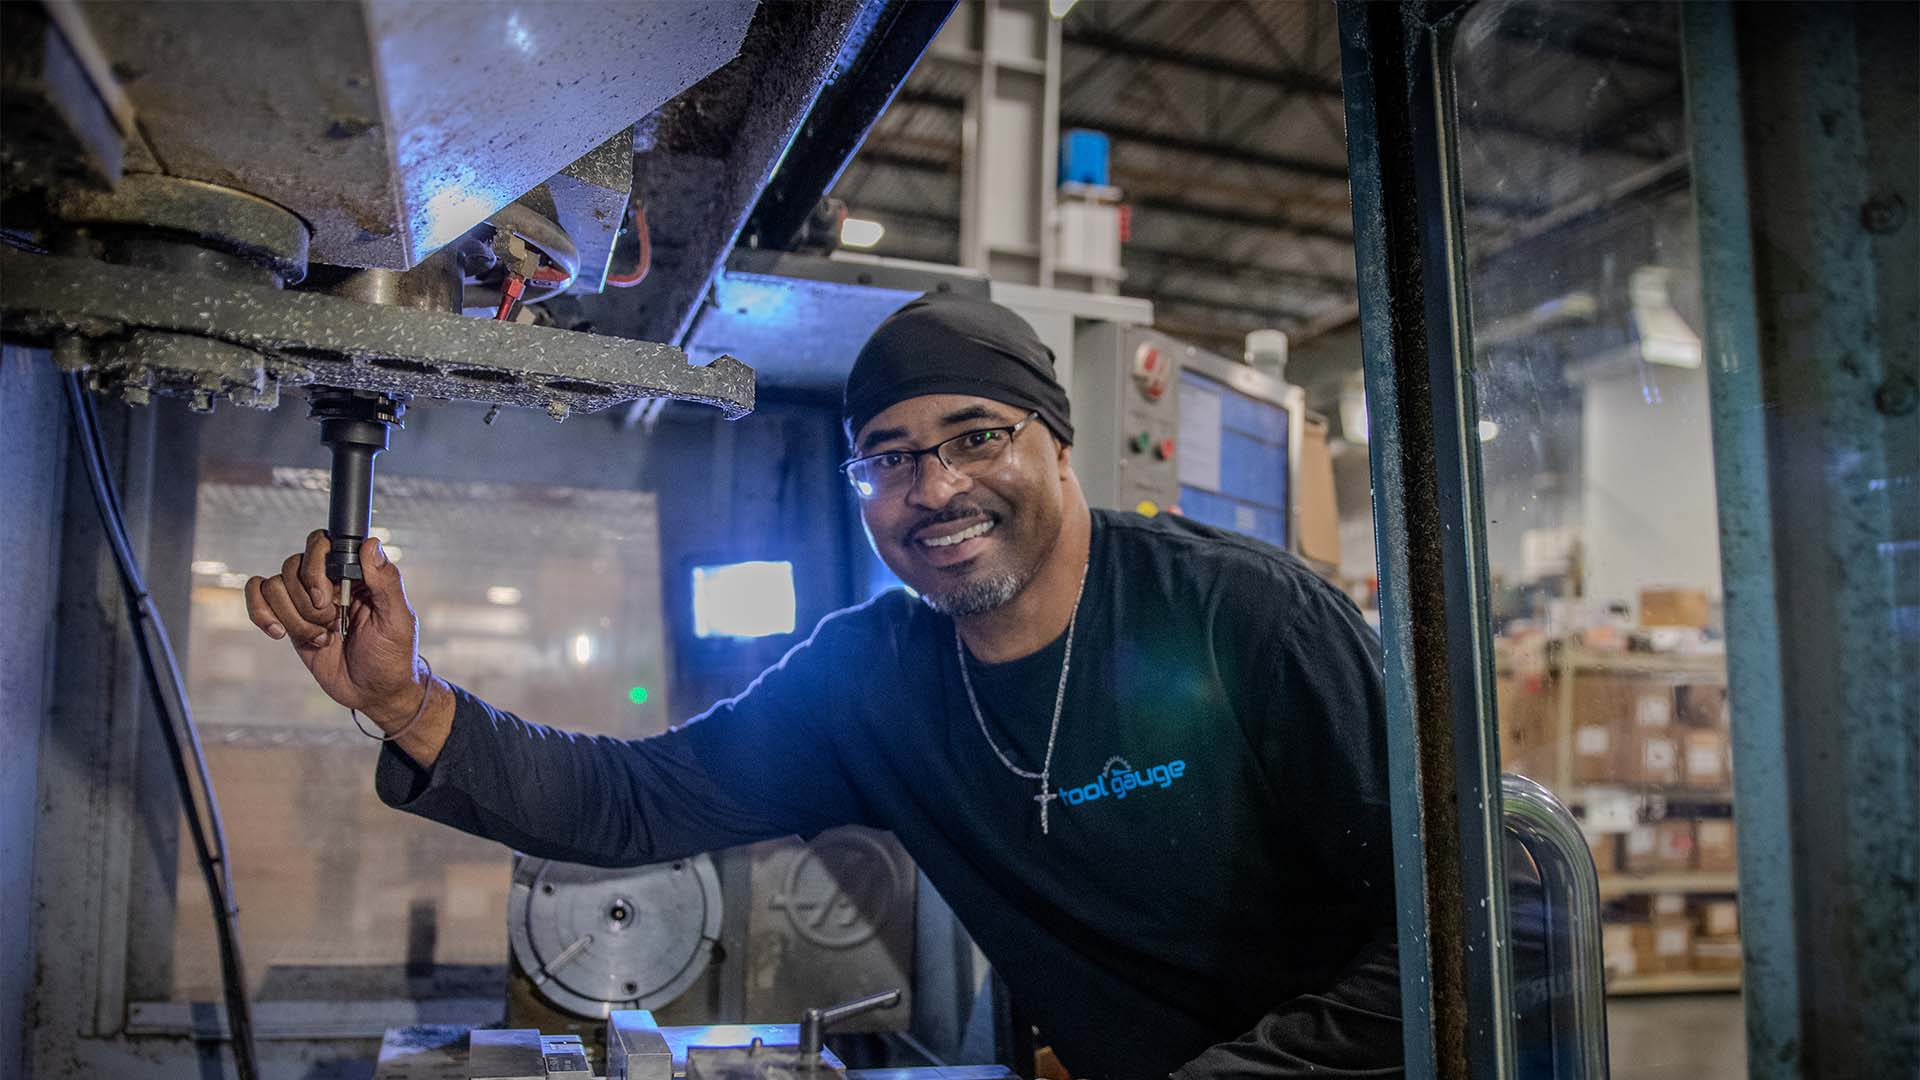 Adolphus Redding inside a HAAS VF2 during his shift as a machinist apprentice at Tool Gauge in Tacoma, Washington.